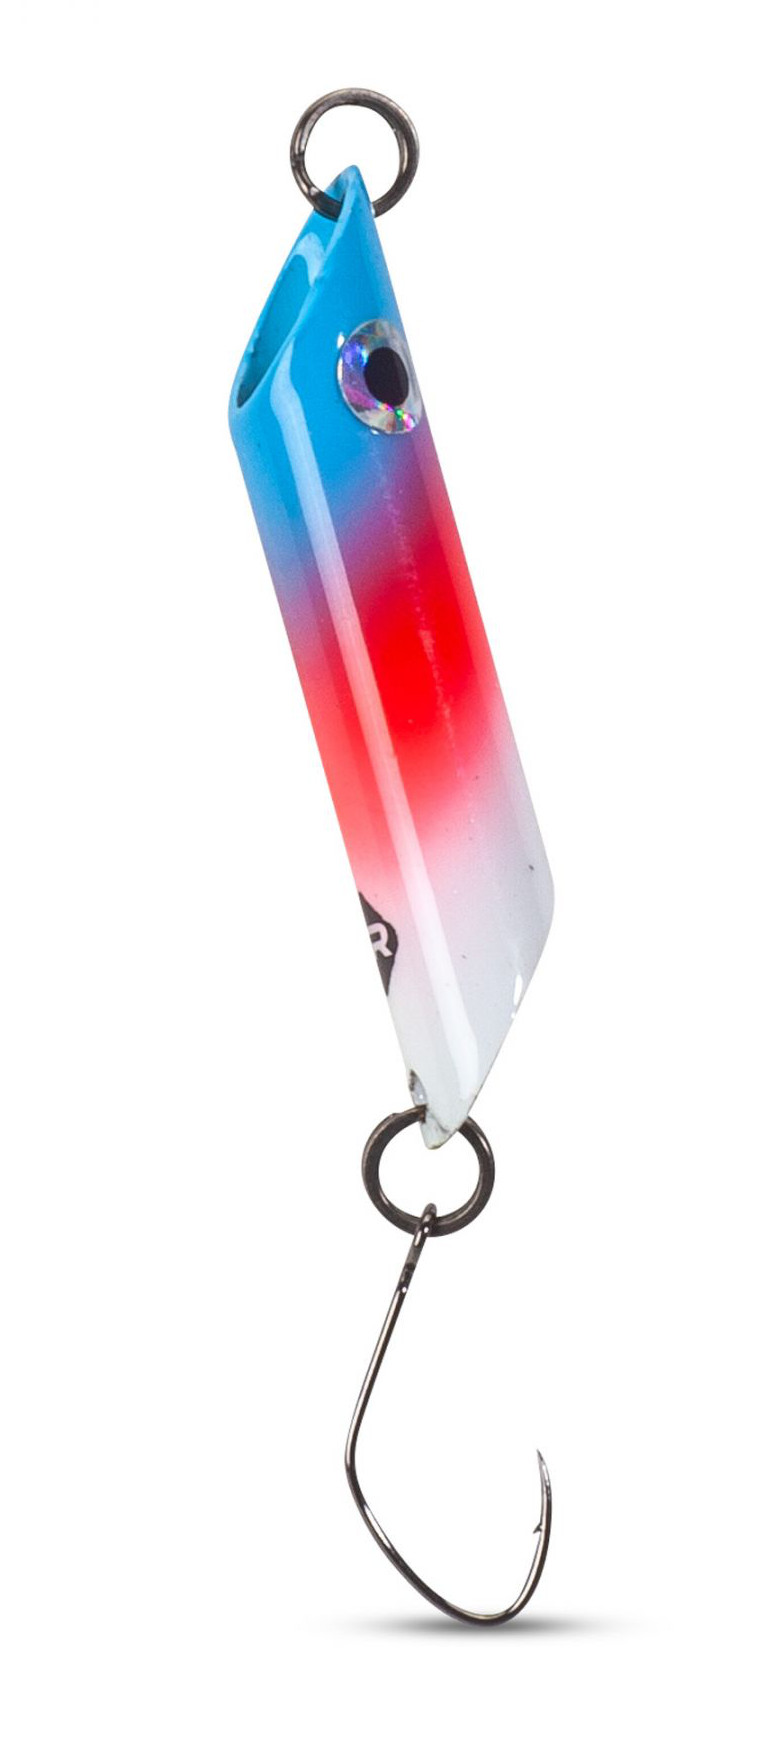 Iron Trout Pico Piper Forellenköder (3g) - Red/Blue